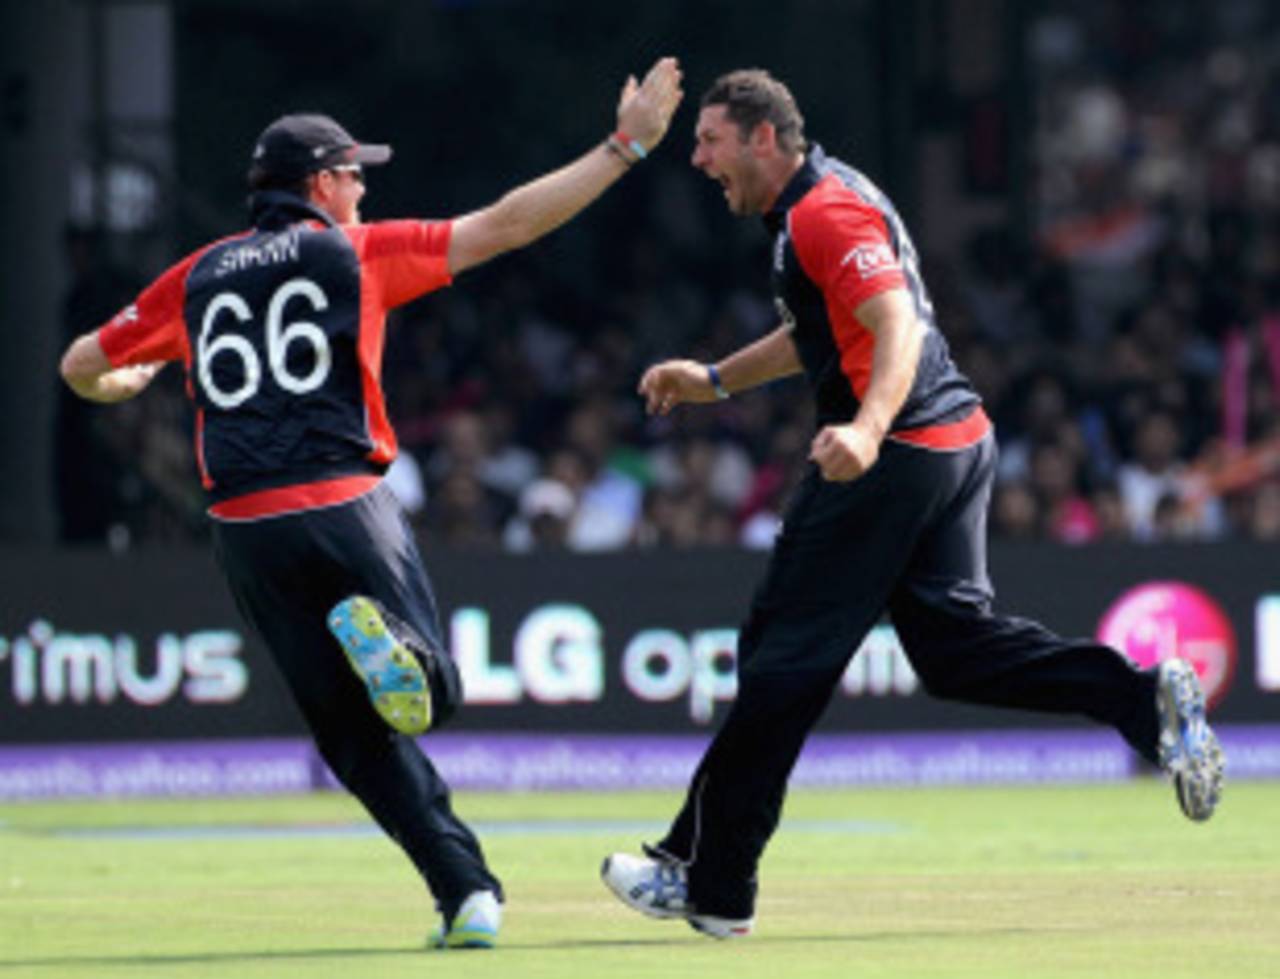 Graeme Swann and Tim Bresnan celebrate the dismissal of Virender Sehwag, India v England, World Cup, Group B, Bangalore, February 27, 2011